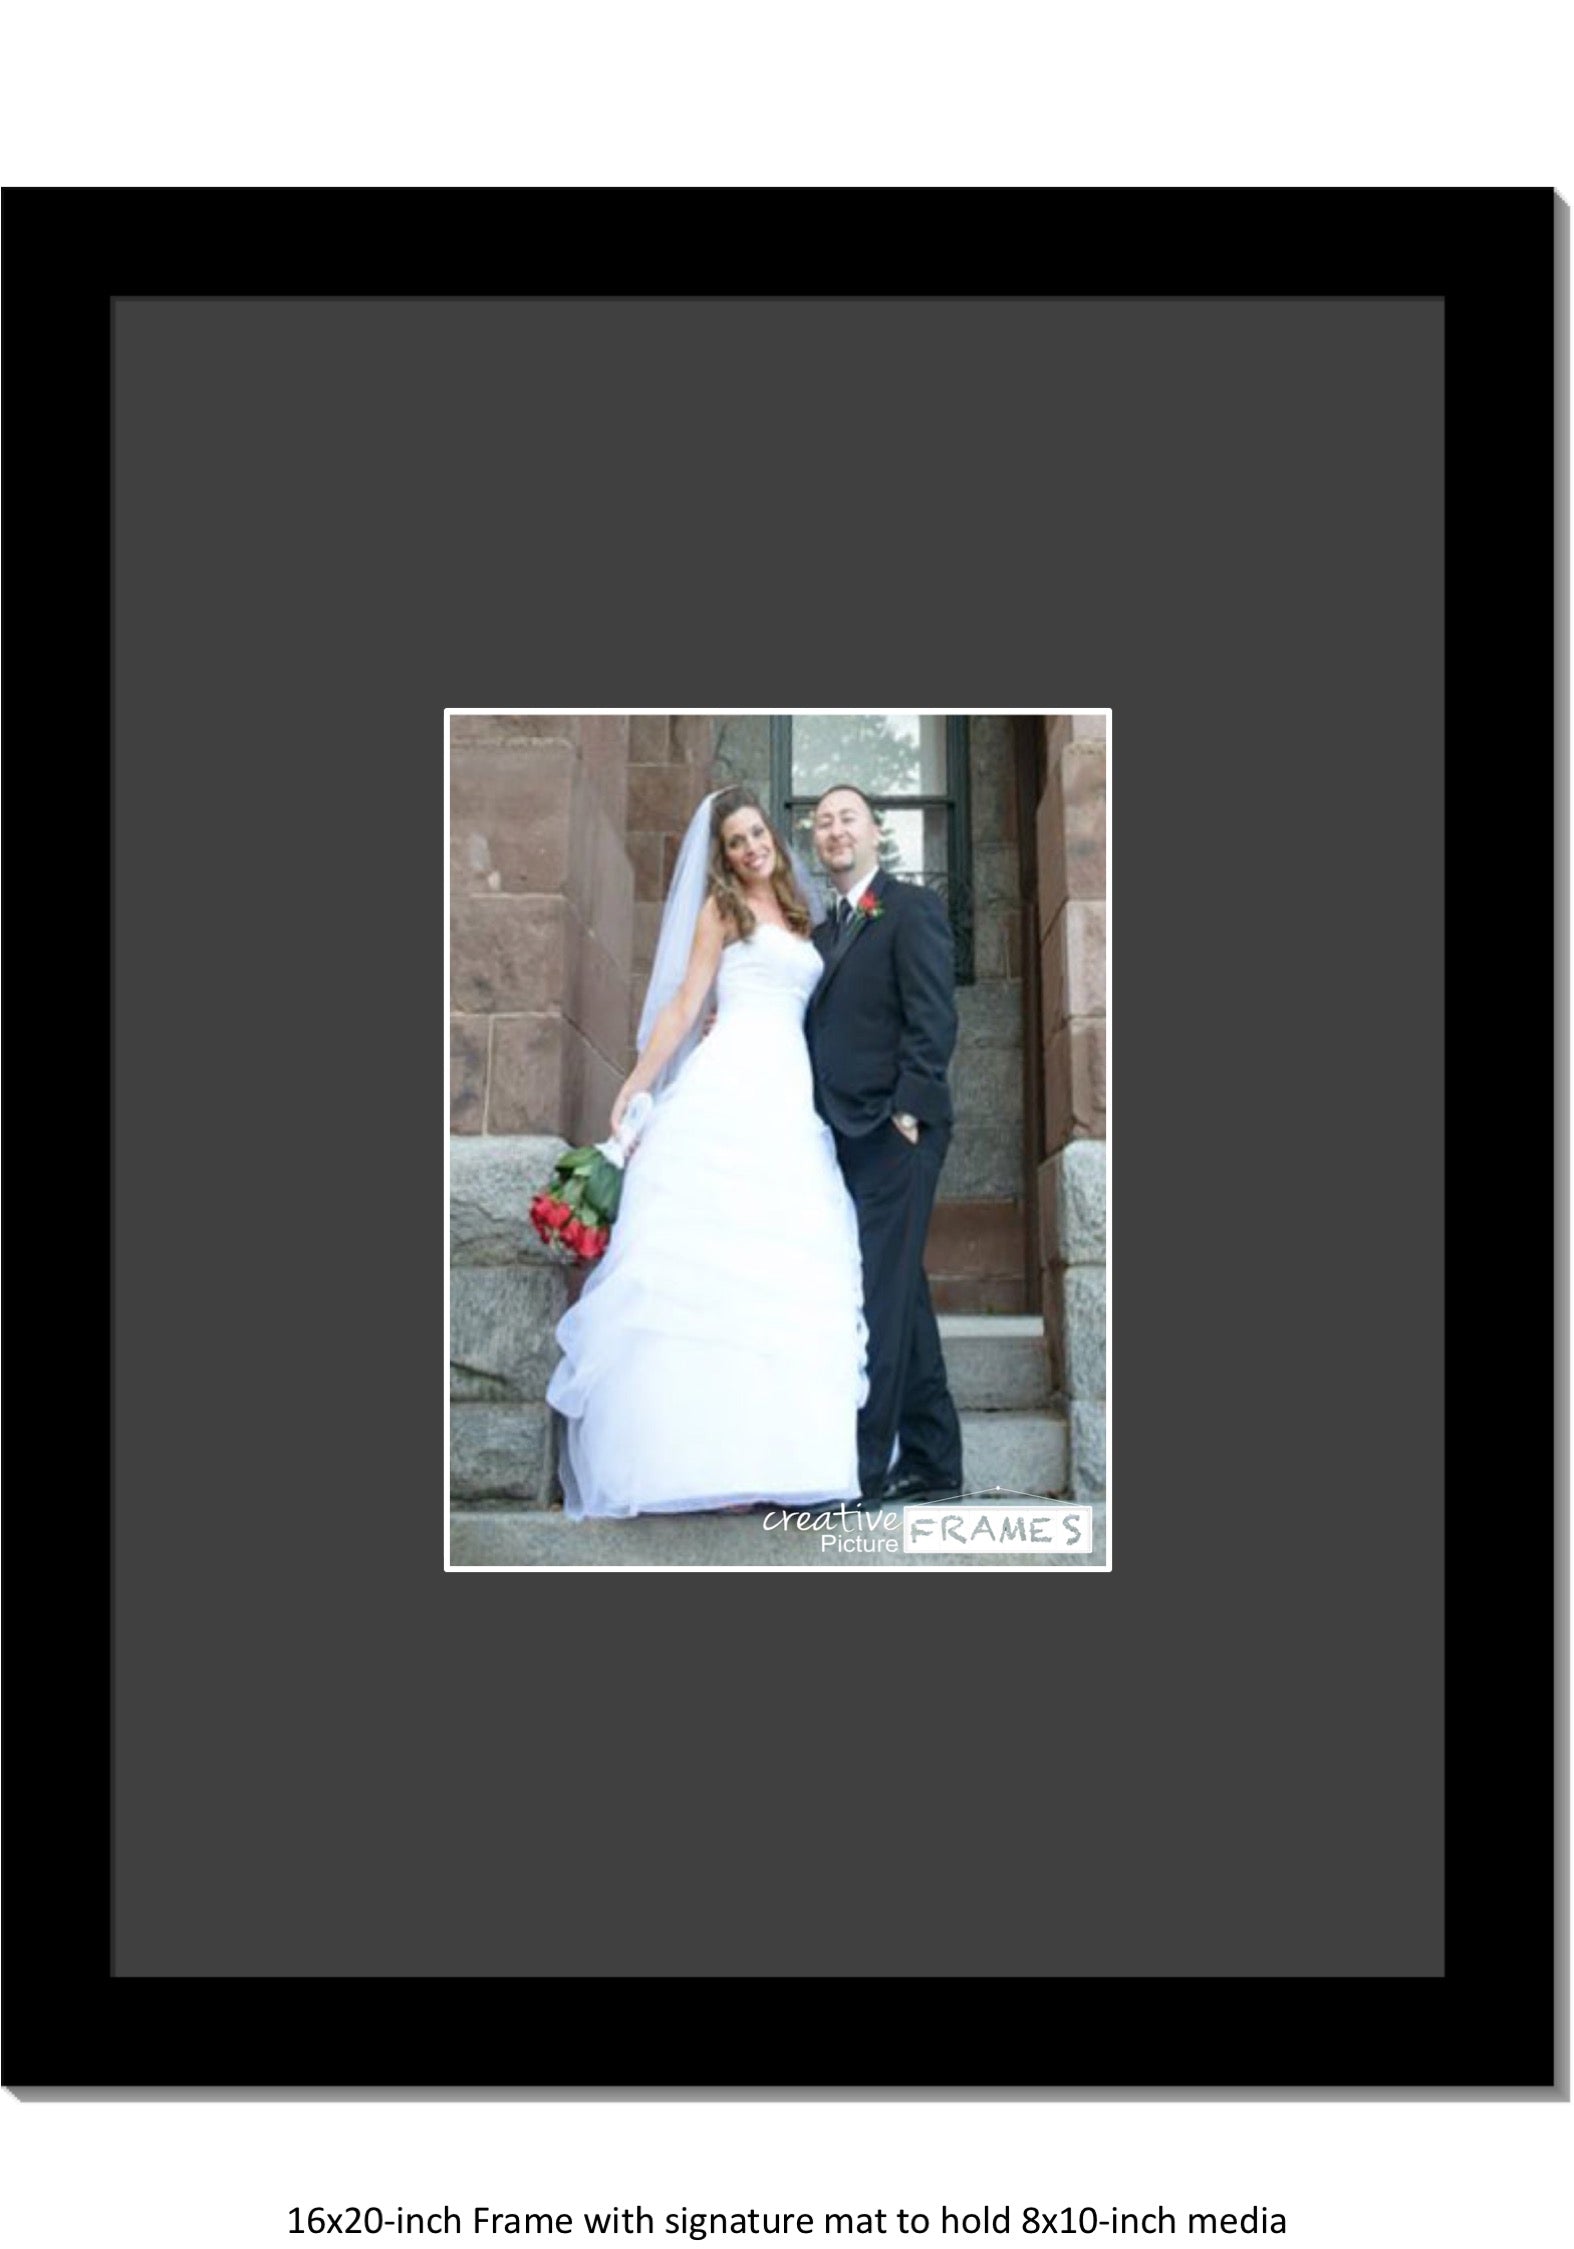 Creative Picture Frames Creativepf 8x10-16x20bk-w Signature Frame - Photo Frame with White Mat Holds 8x10-inch Media Including Installed Wall Hangers